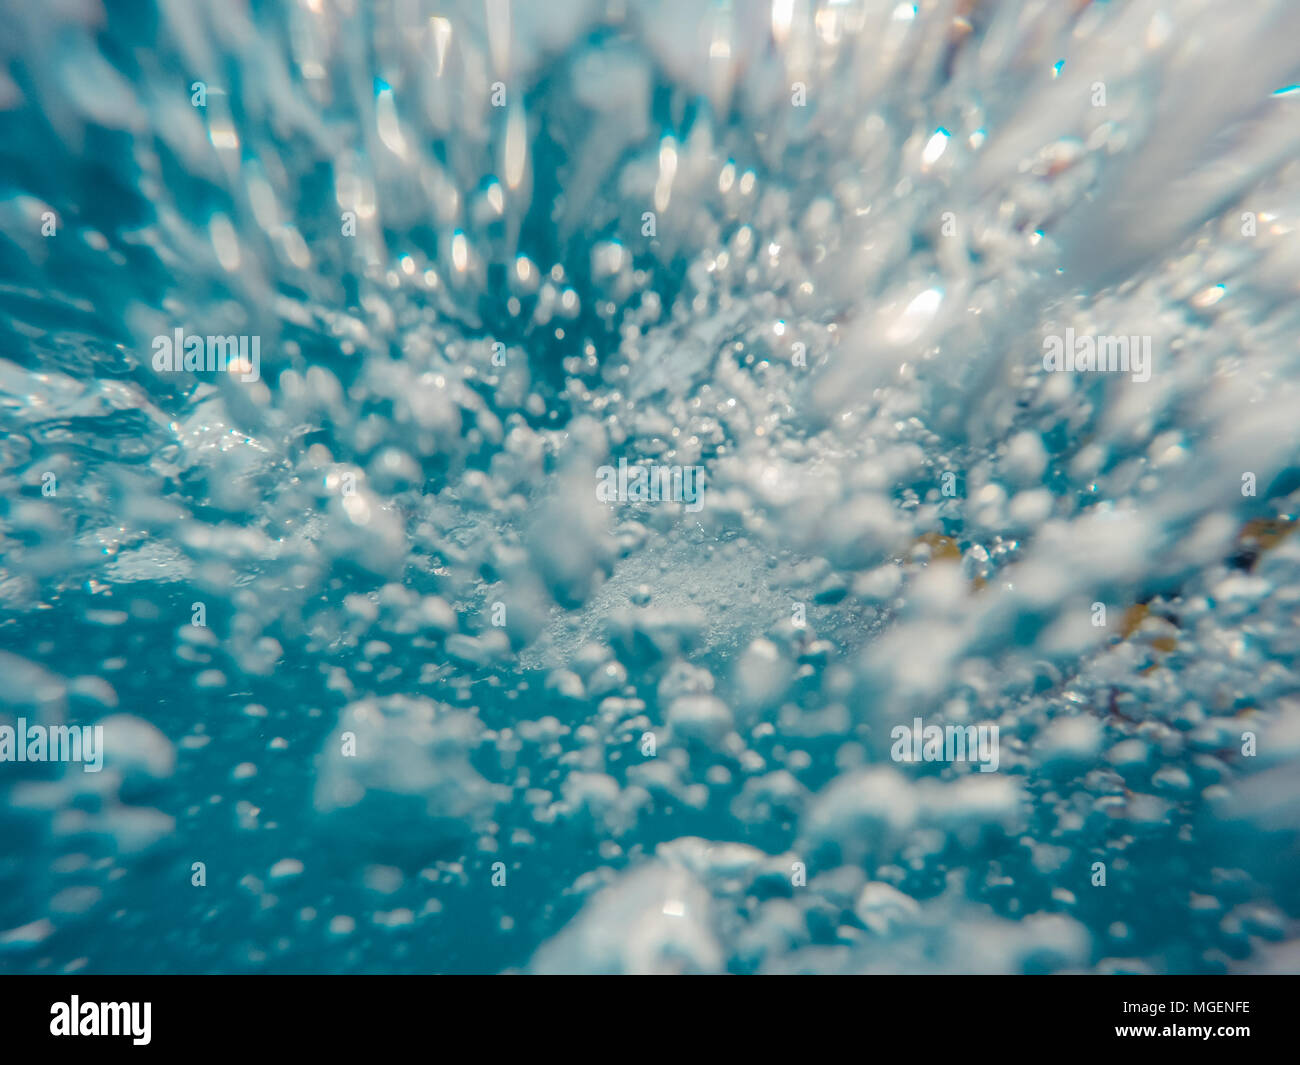 Underwater view of bubbles in motion Stock Photo - Alamy